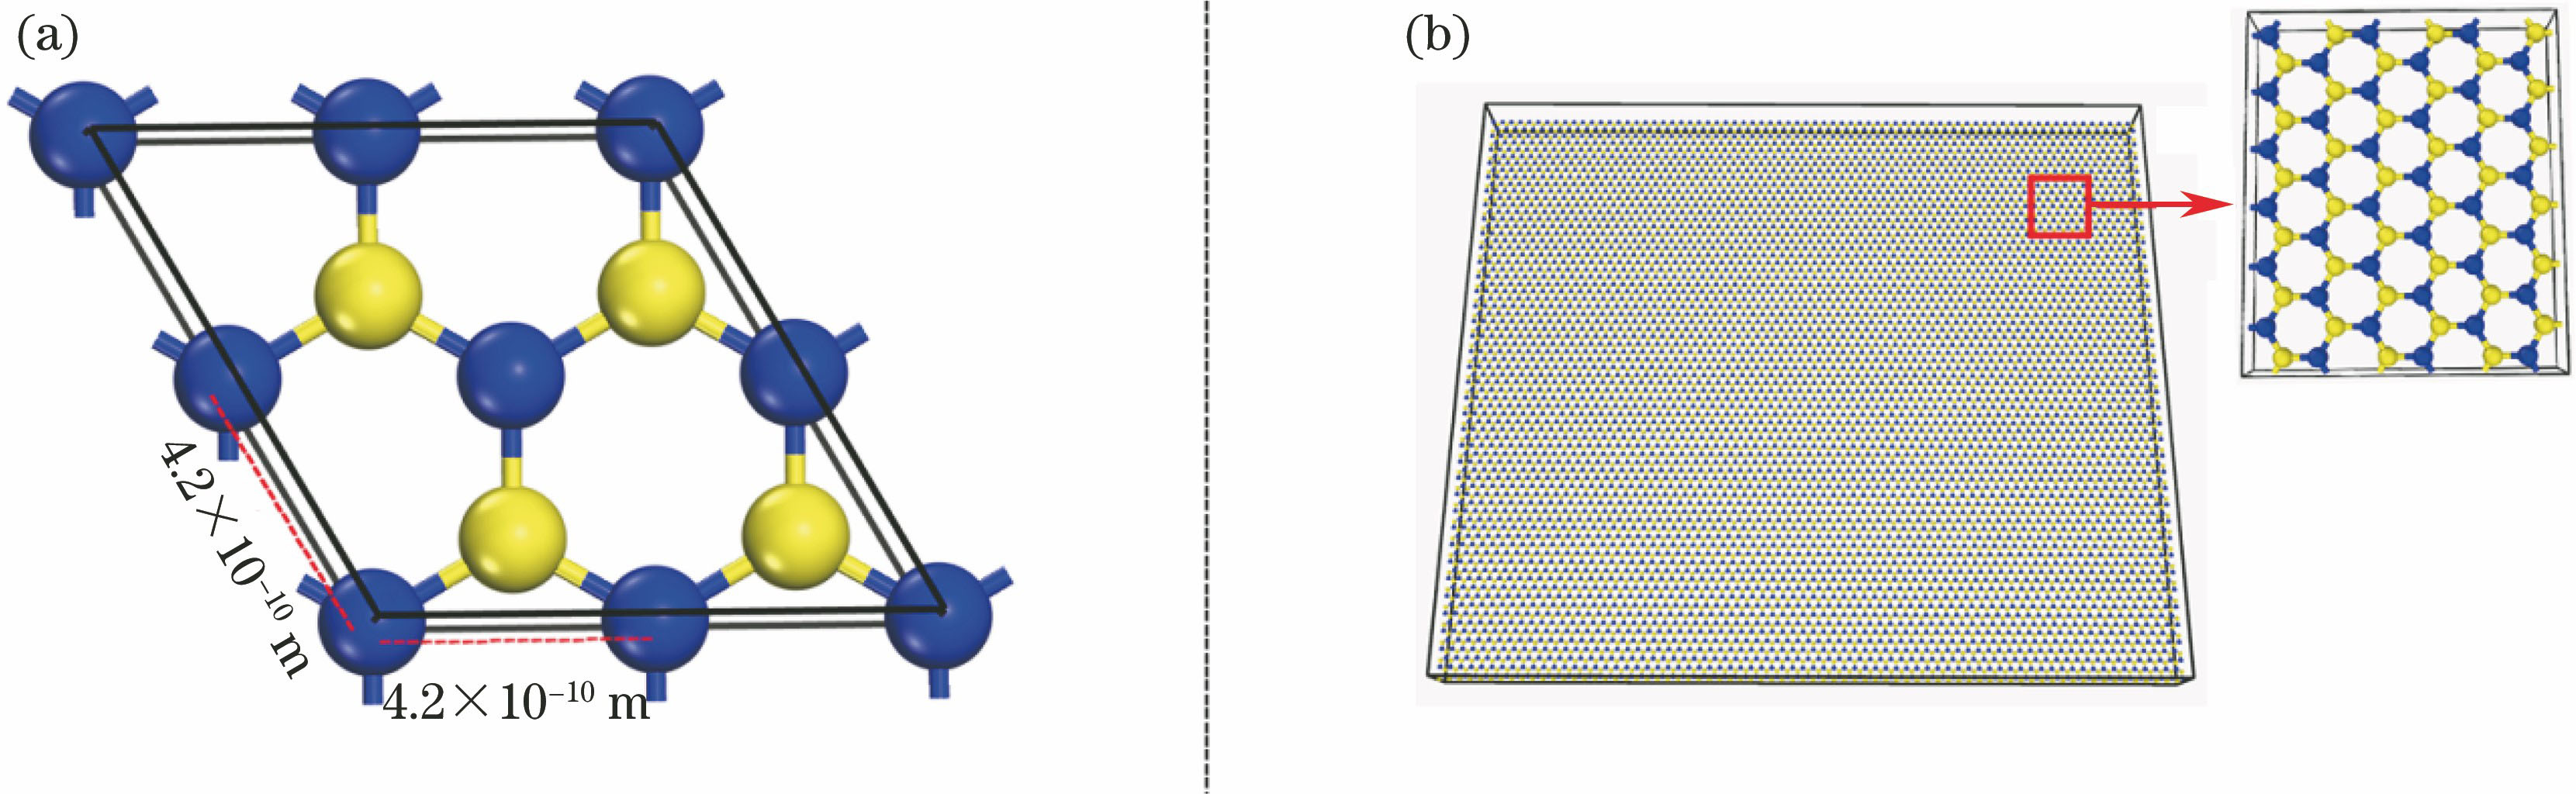 Graphene-like structure of two-dimensional (2D) GaAs. (a) Model in first-principle calculation; (b) model in molecular dynamics